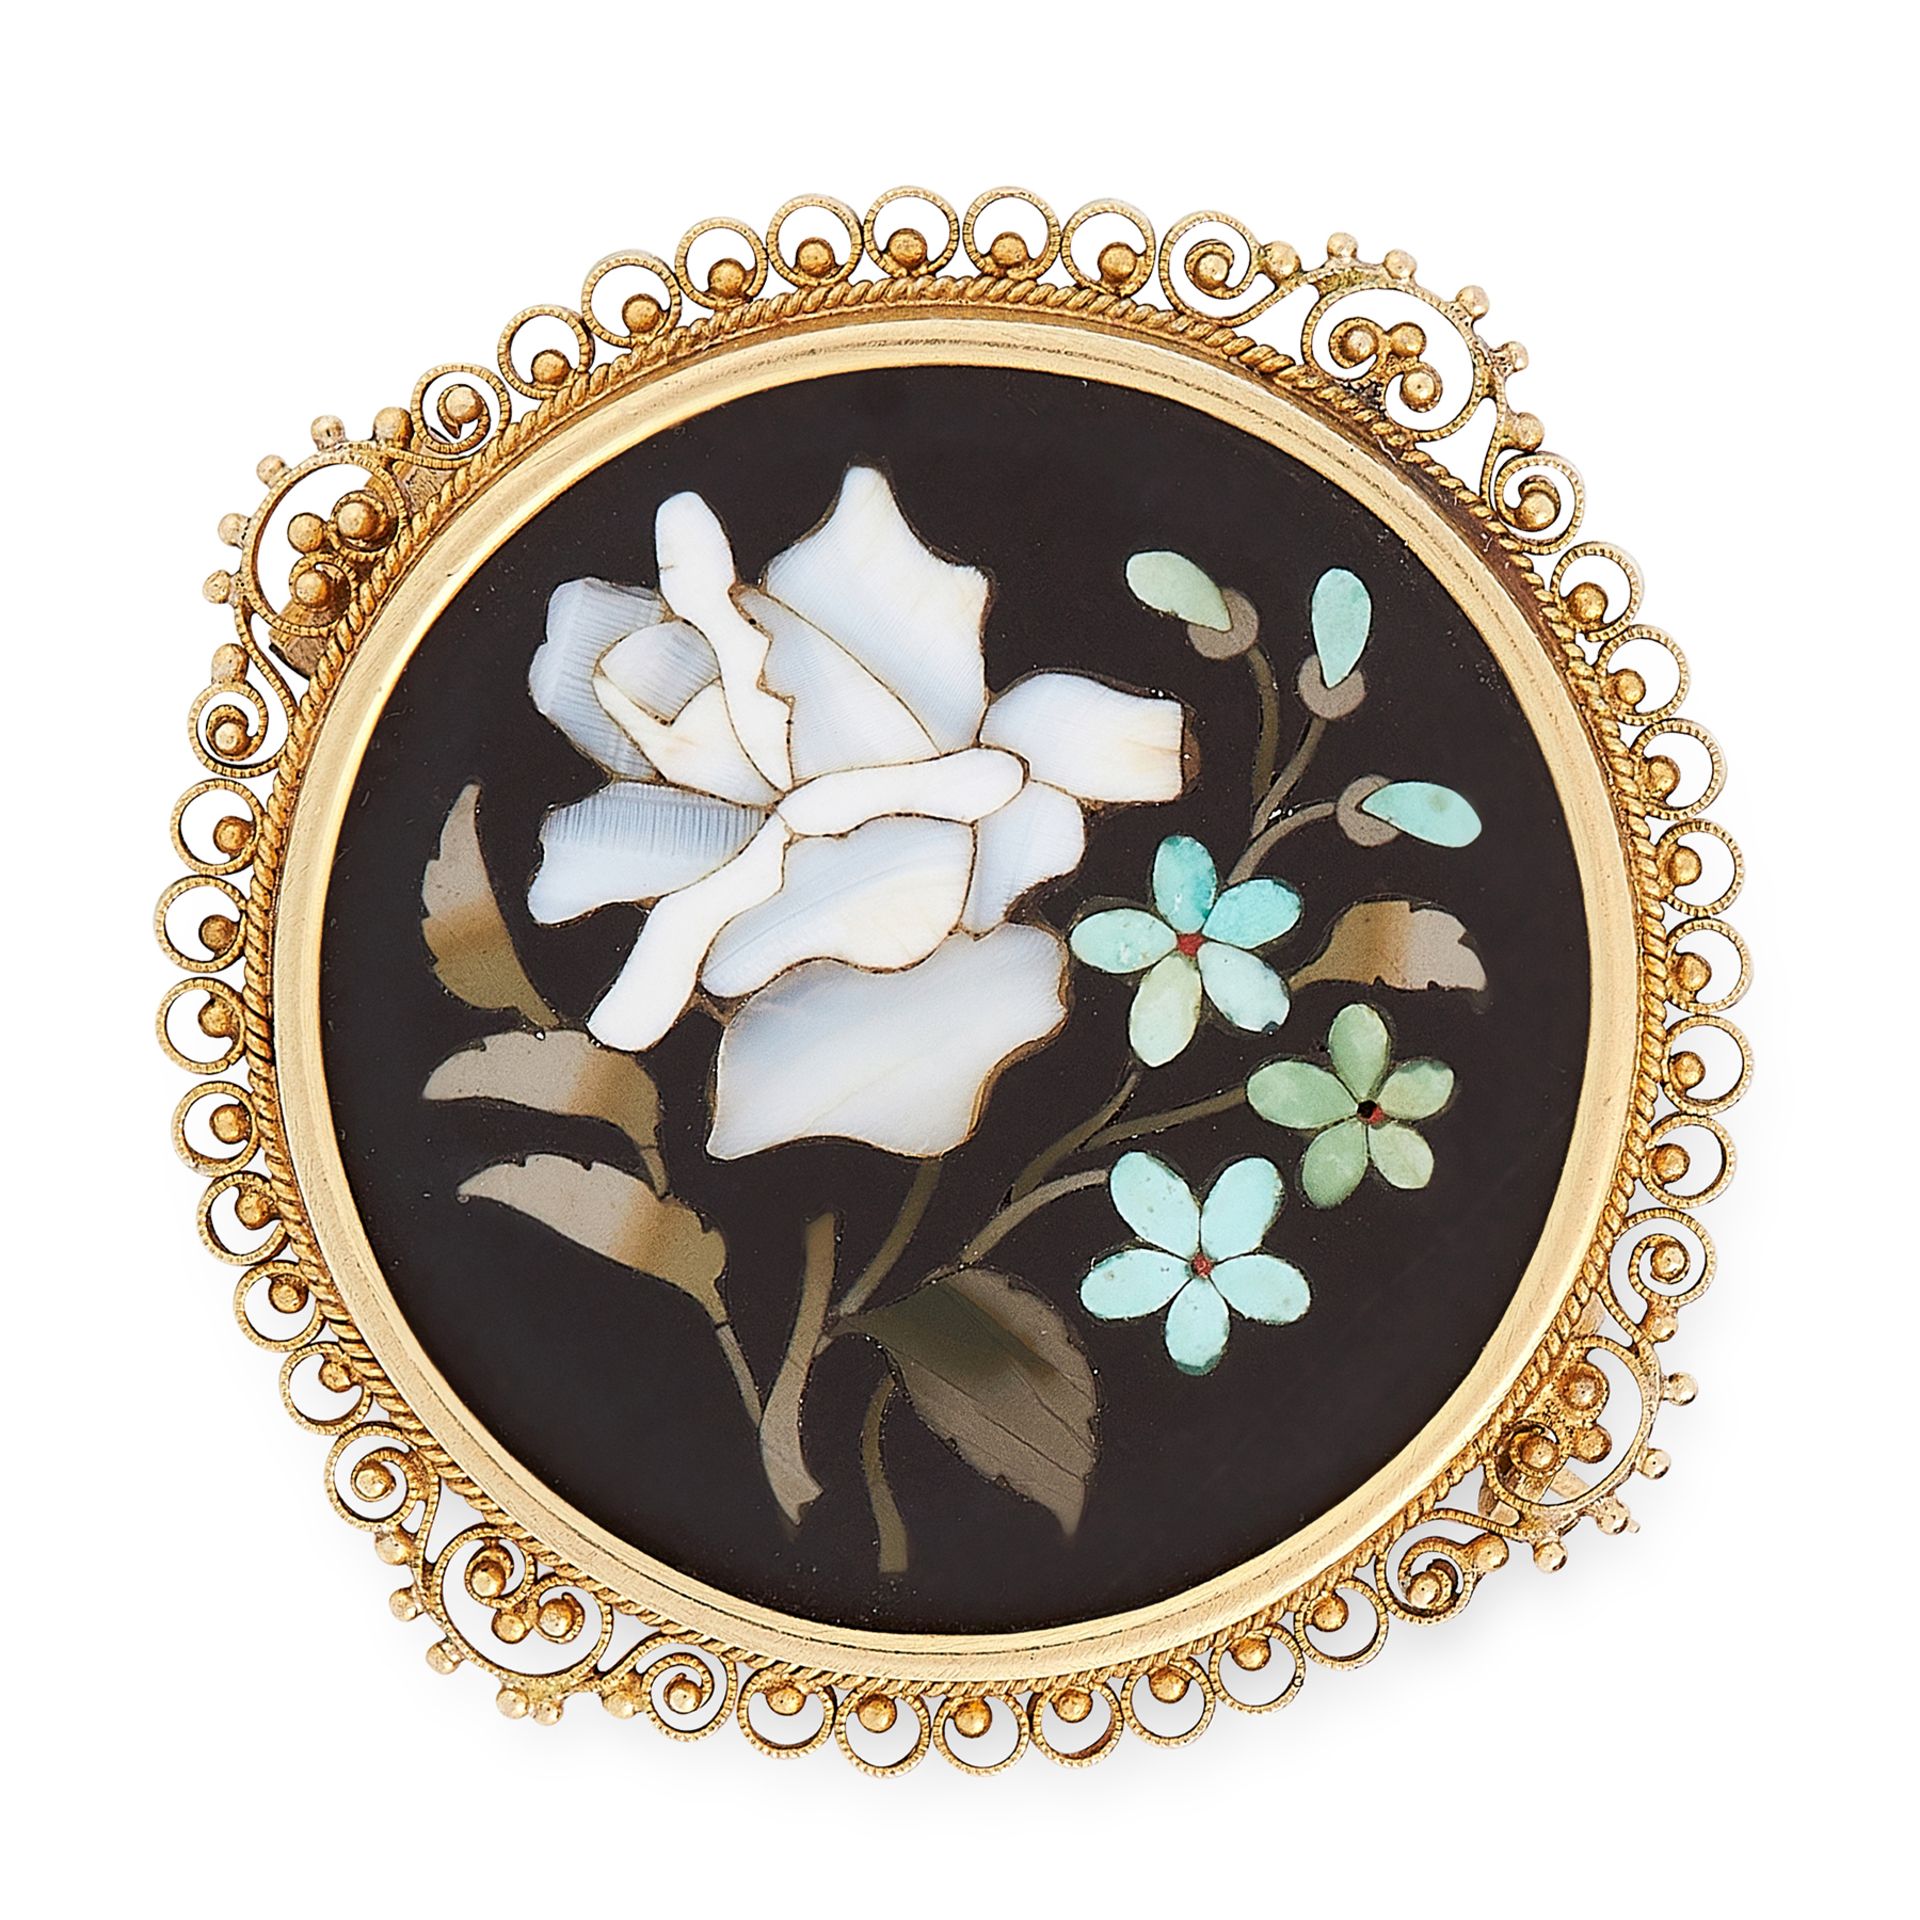 AN ANTIQUE PIETRA DURA BROOCH in yellow gold, the circular face set with polished hardstone pieces